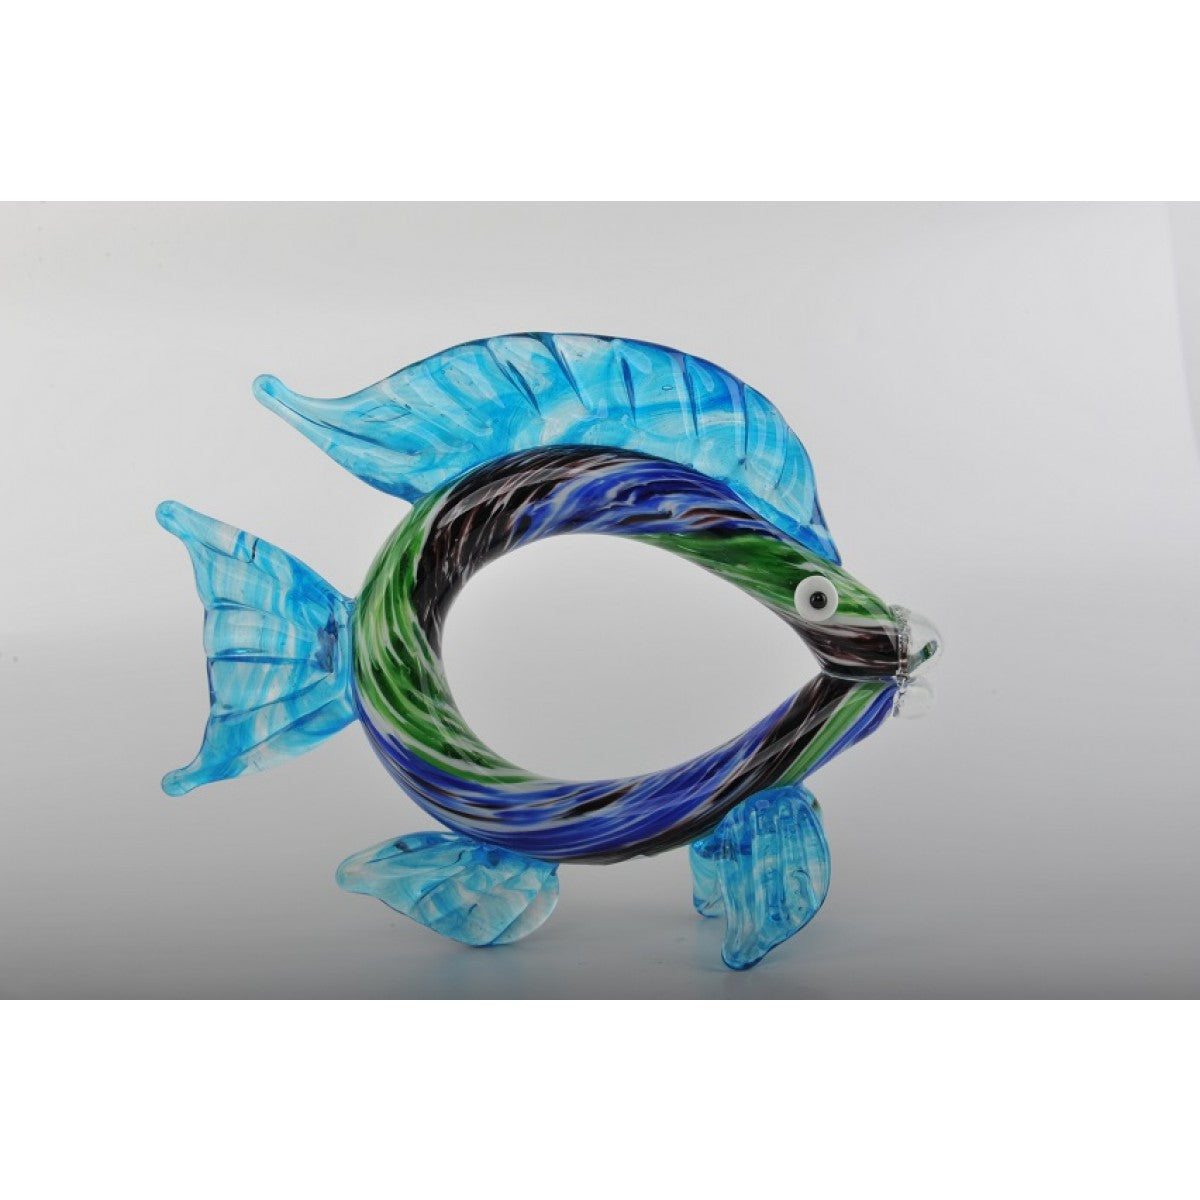 Glass Decoration of Blue & Green Fish